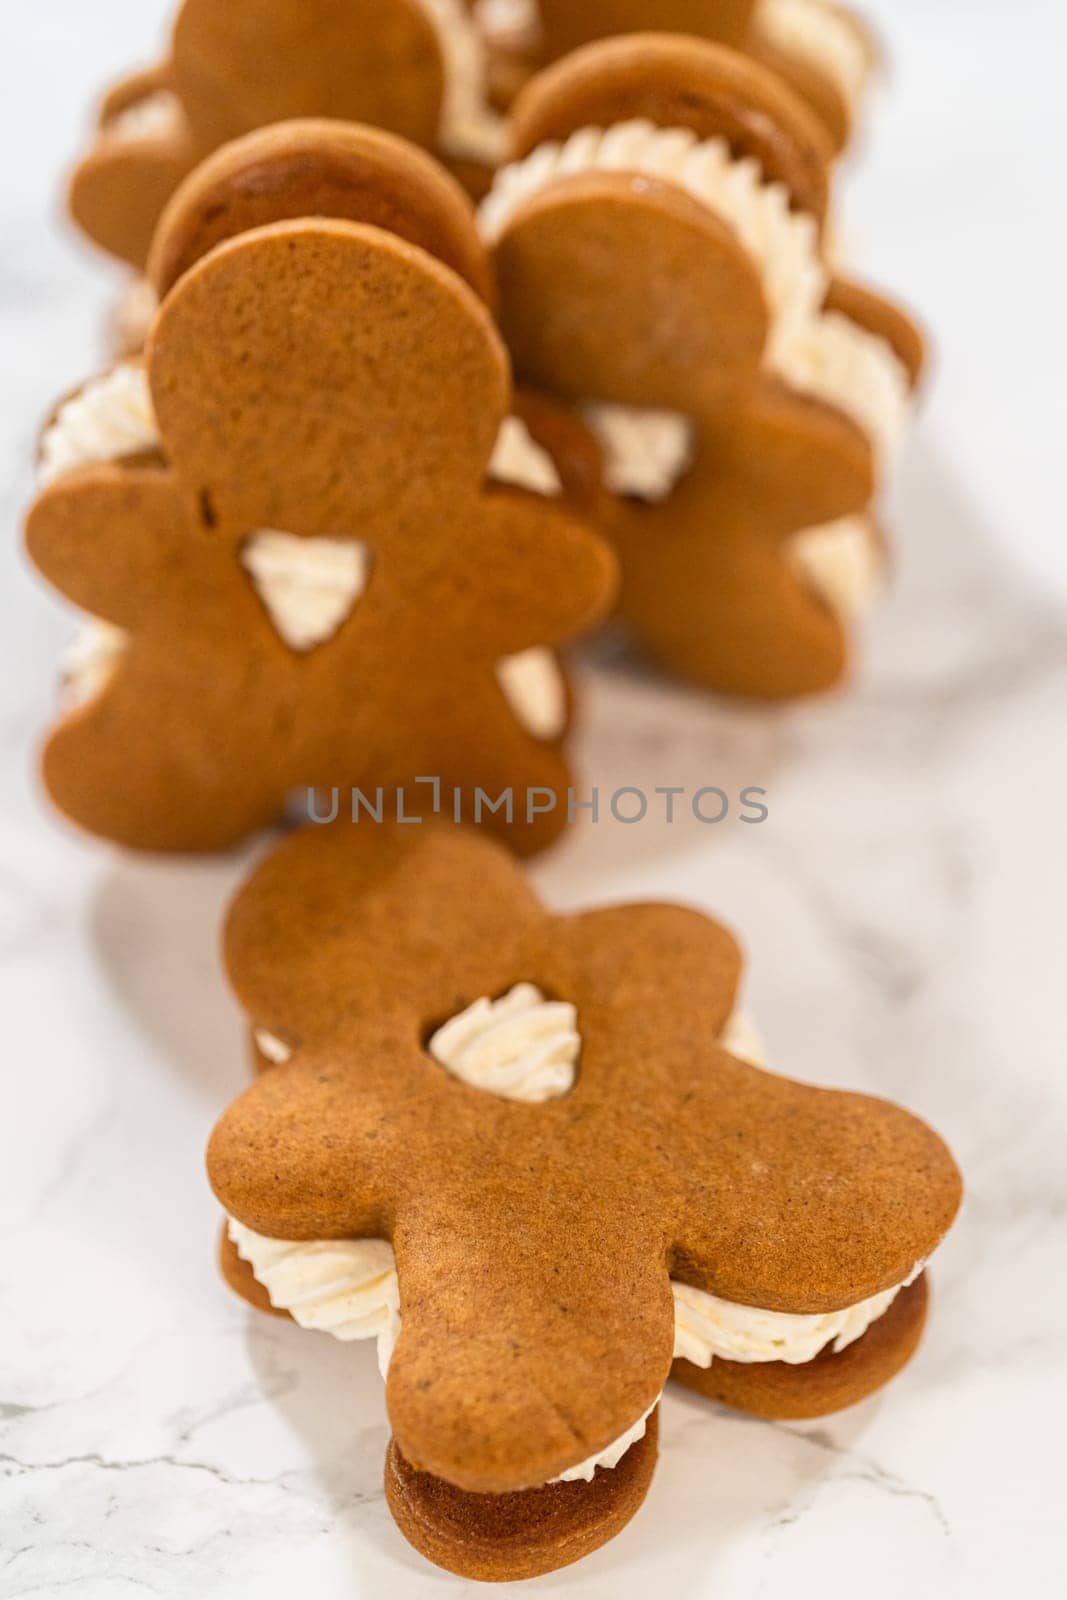 Gingerbread cookies filled with eggnog buttercream stand out, their rich hue complementing the eggnog buttercream, against a gentle background. These festive treats exude a homemade allure.